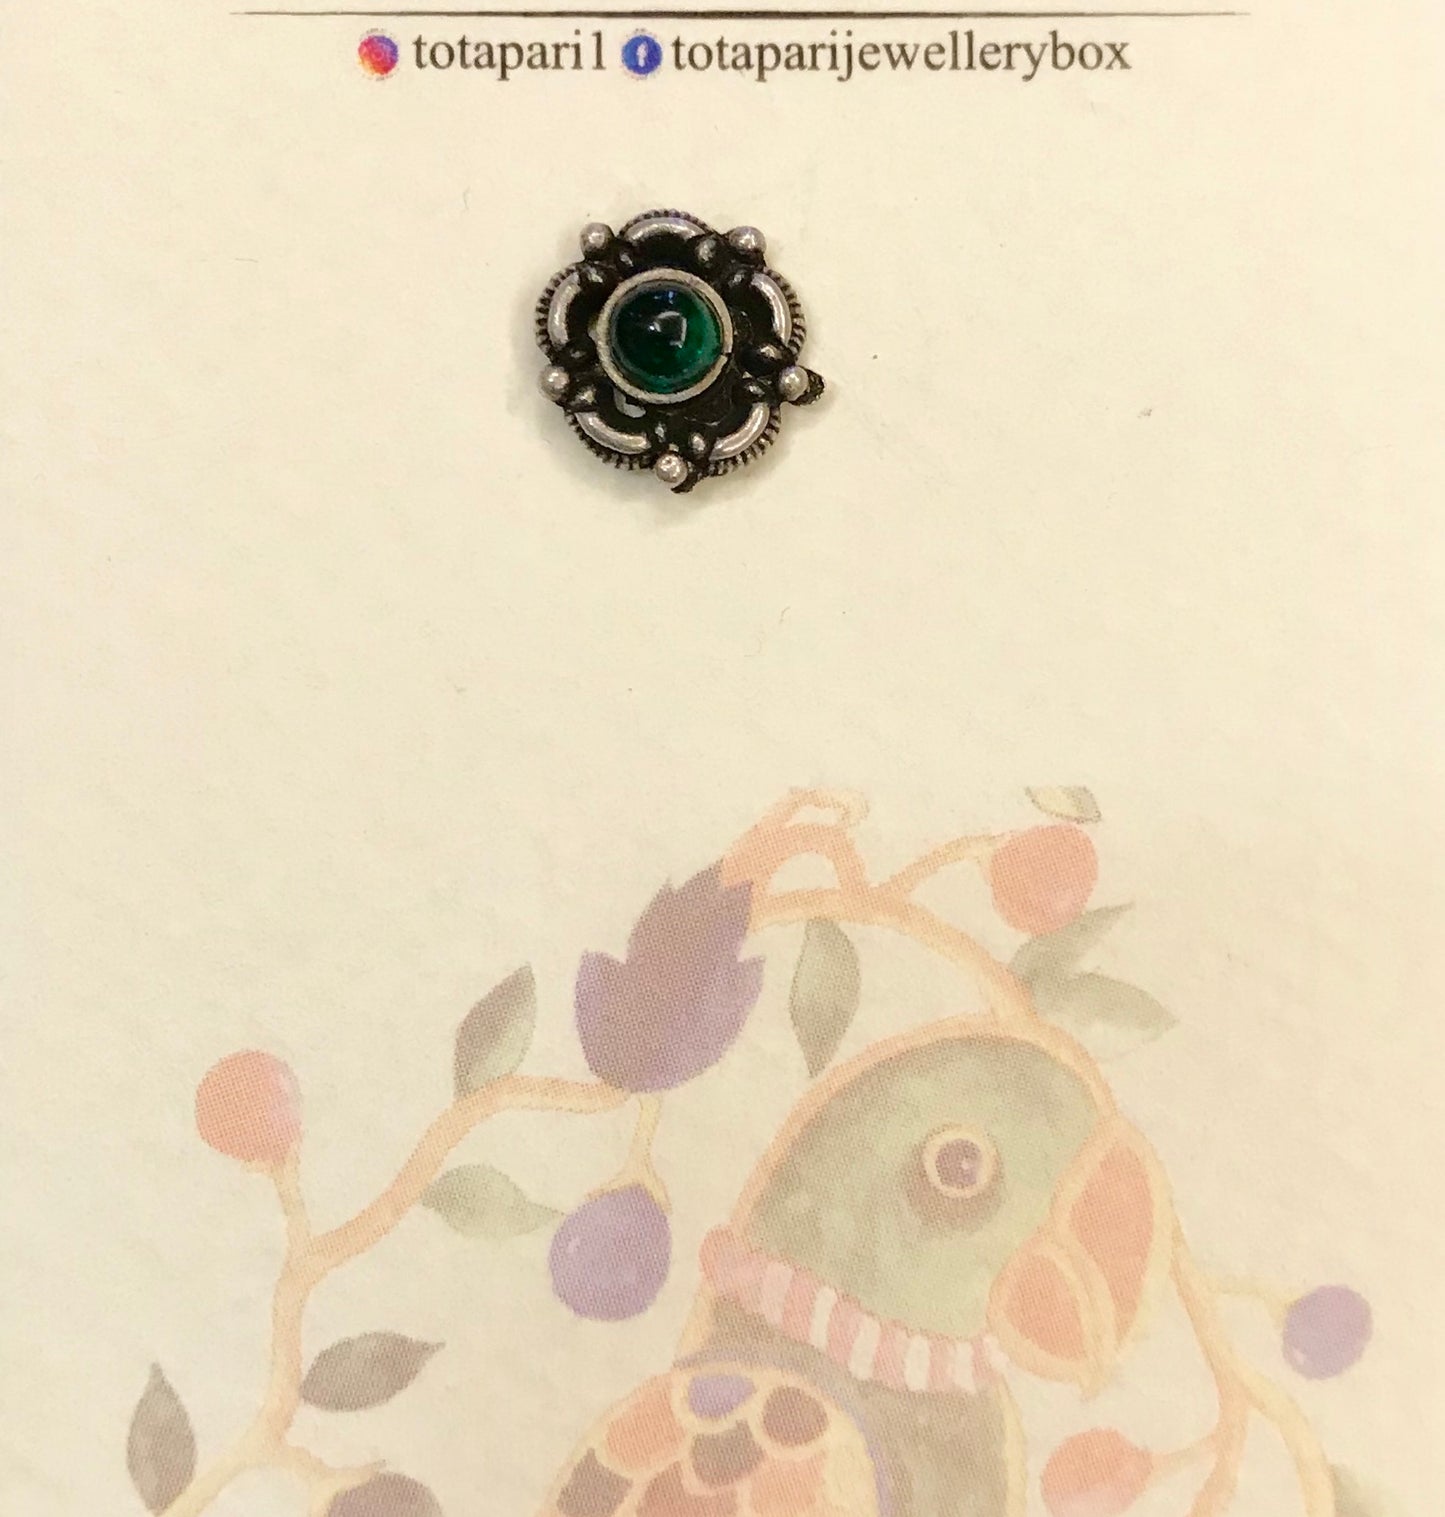 Green Stone Nose Pin